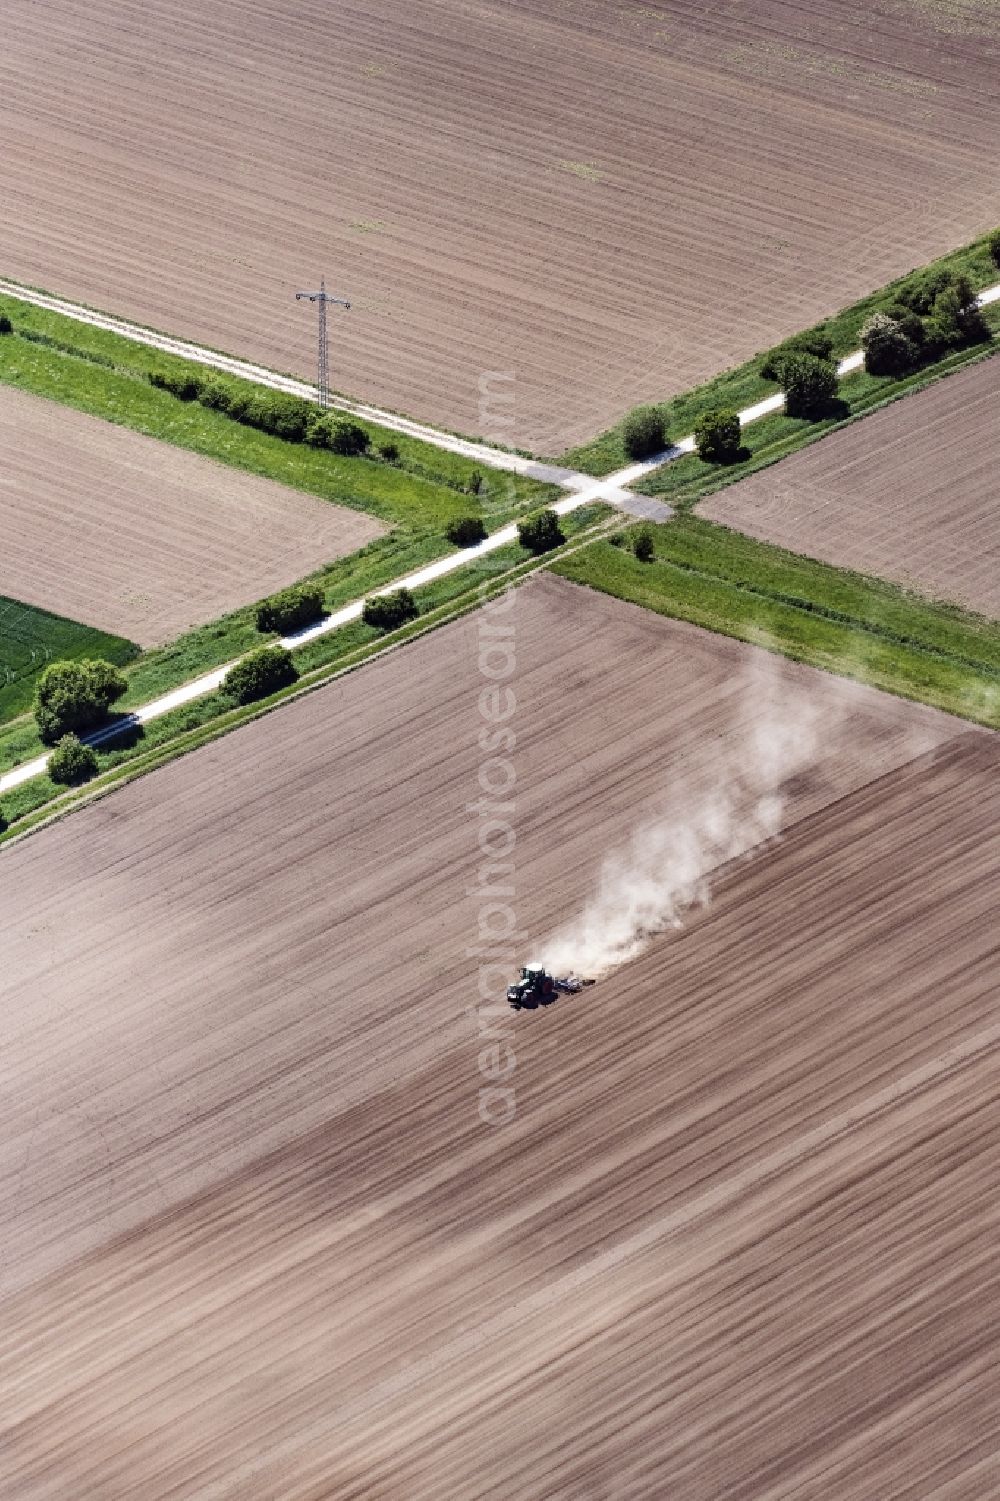 Worms from above - Plowing and shifting the earth by a tractor with plow on agricultural fields in Worms in the state Rhineland-Palatinate, Germany